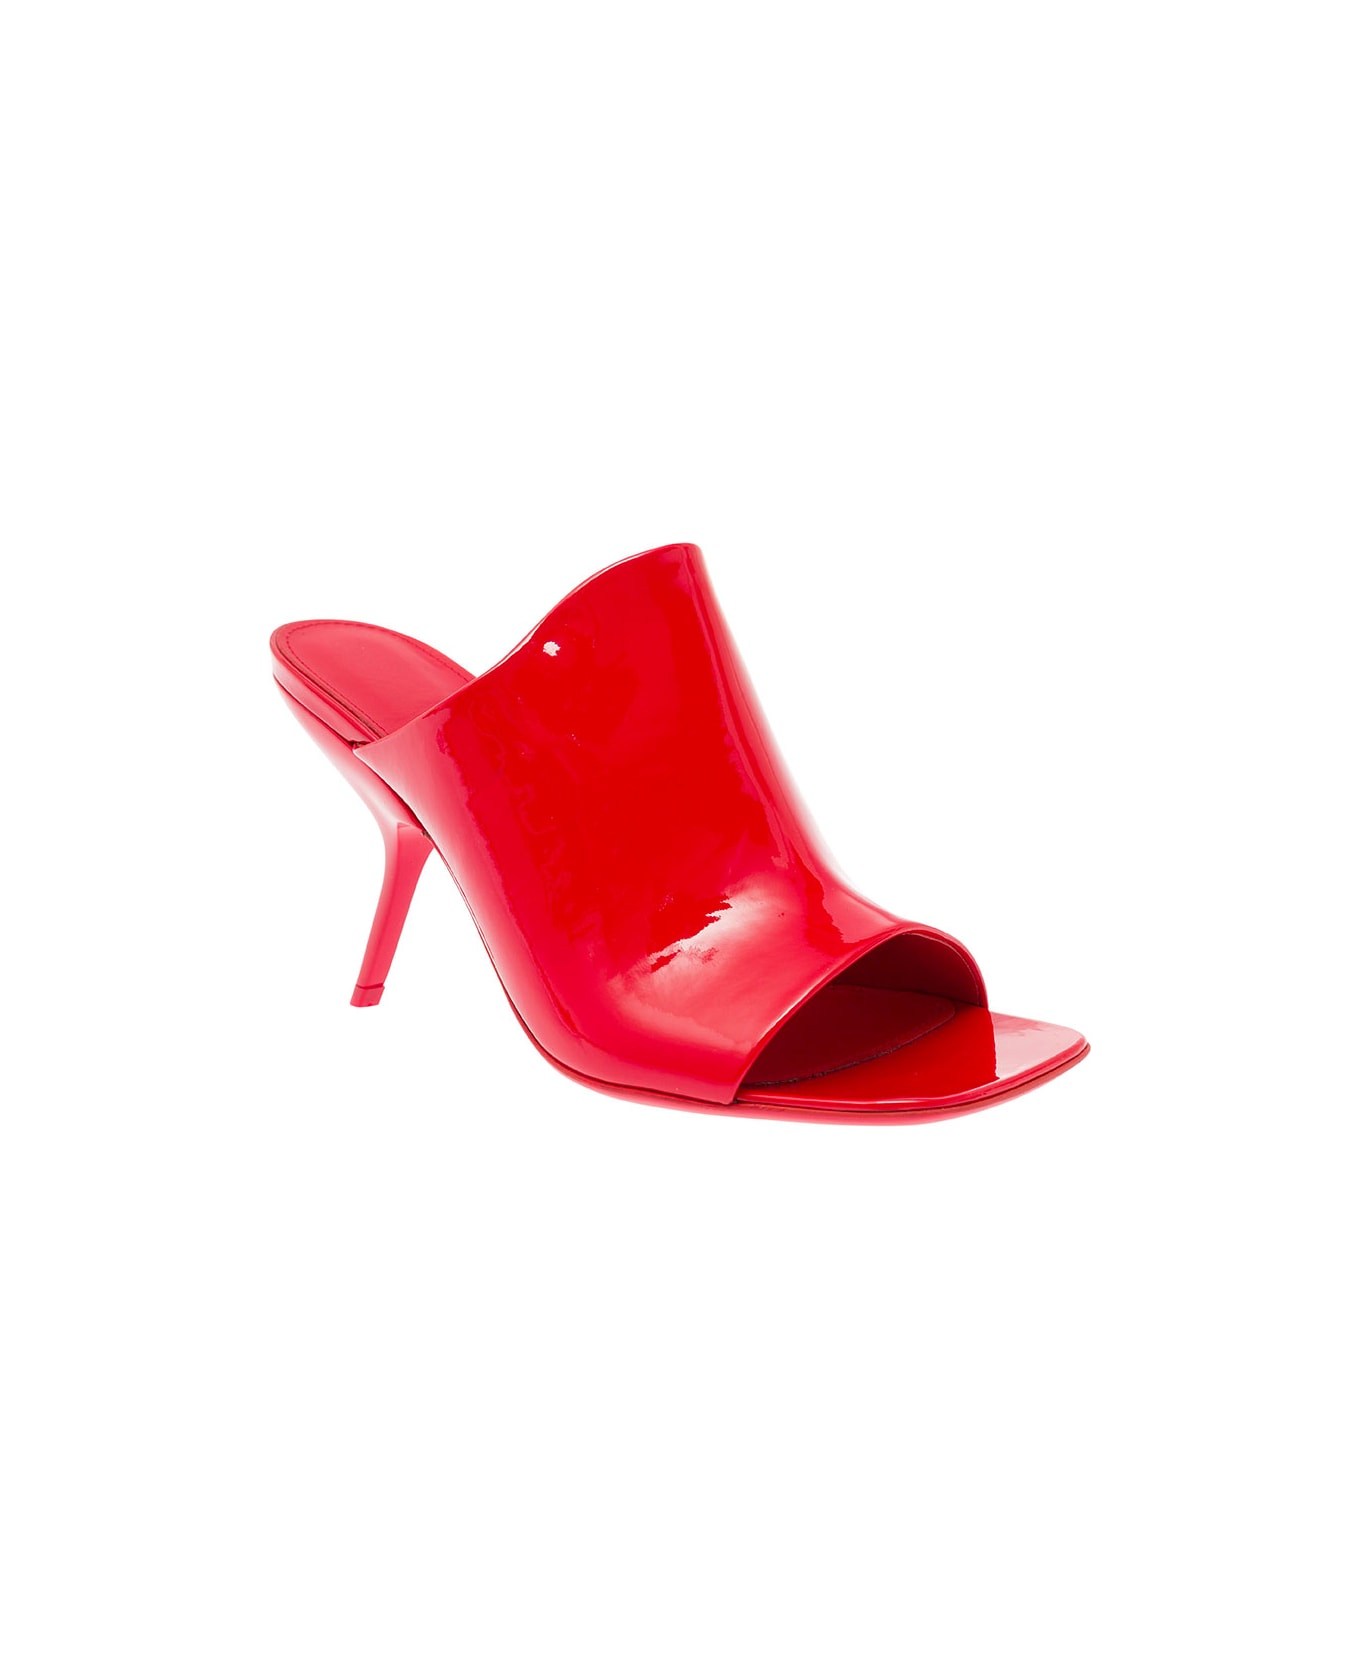 Ferragamo 'open Toe' Red Slide With Slanted, Contoured Heel In Patent Leather Woman - RED サンダル